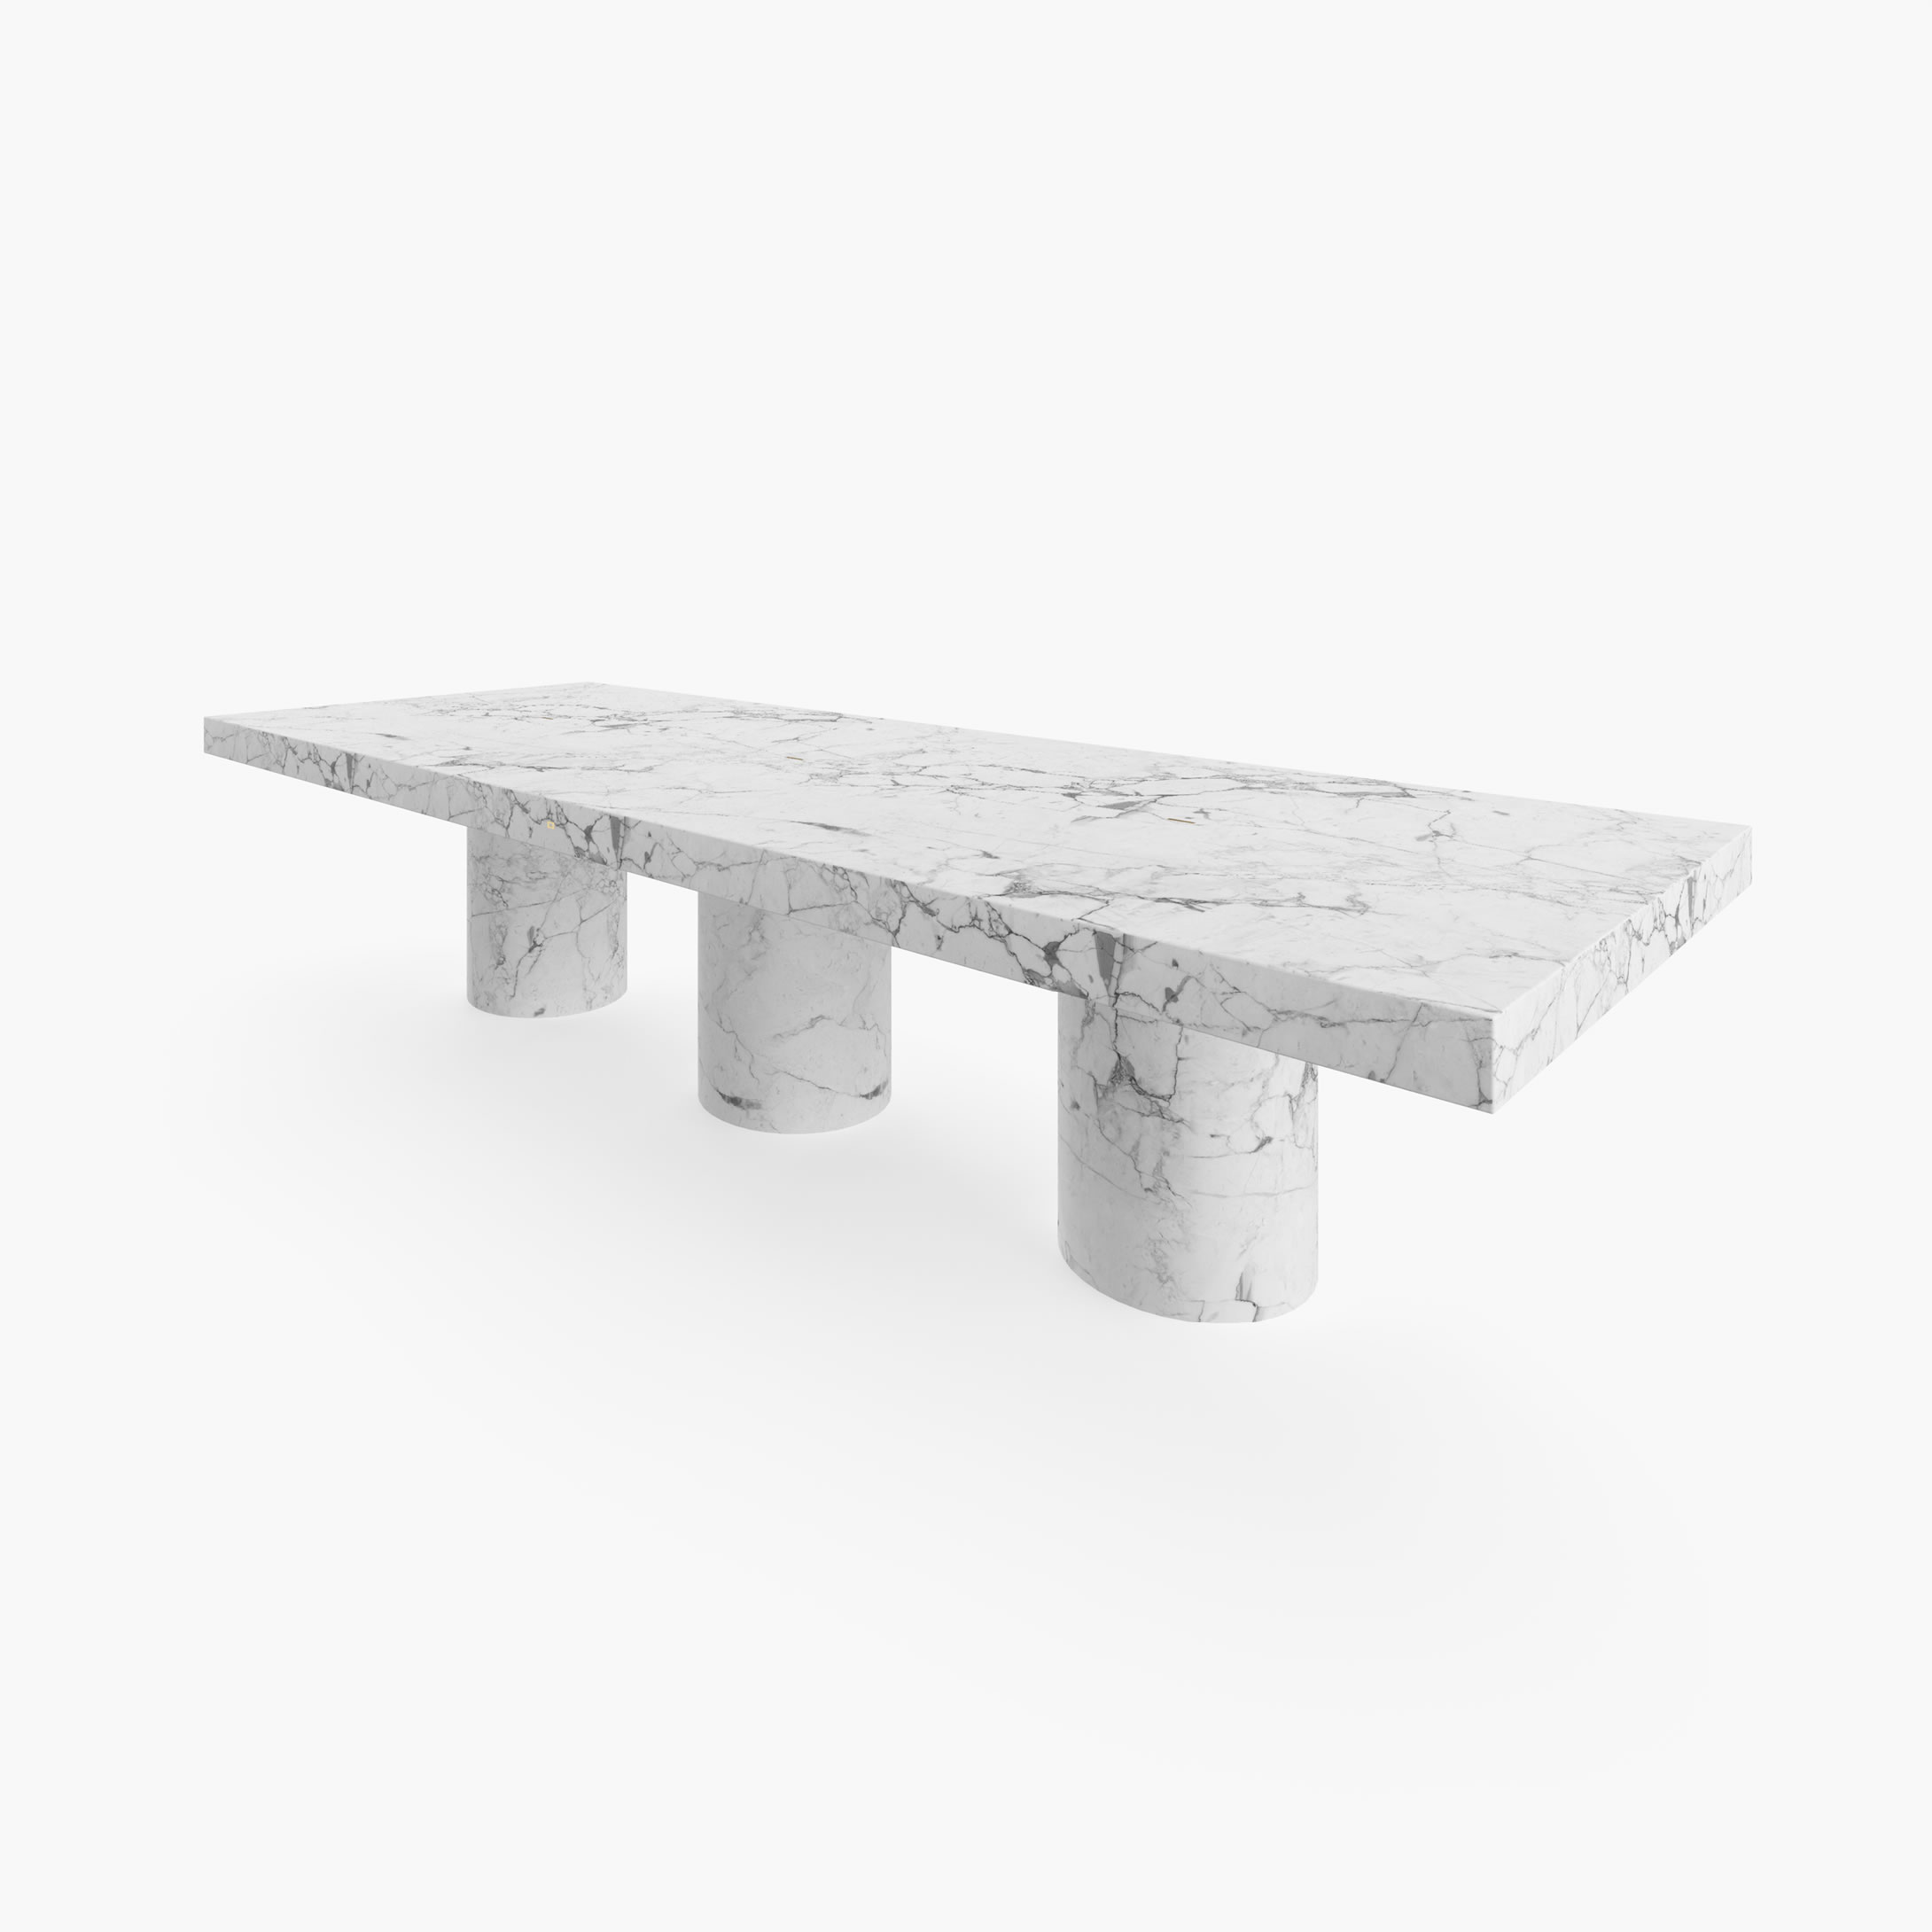 Dining Table Cylinder legs White Arabescato Marble avant gard Dining Room minimalism Dining Tables FS 173 FELIX SCHWAKE